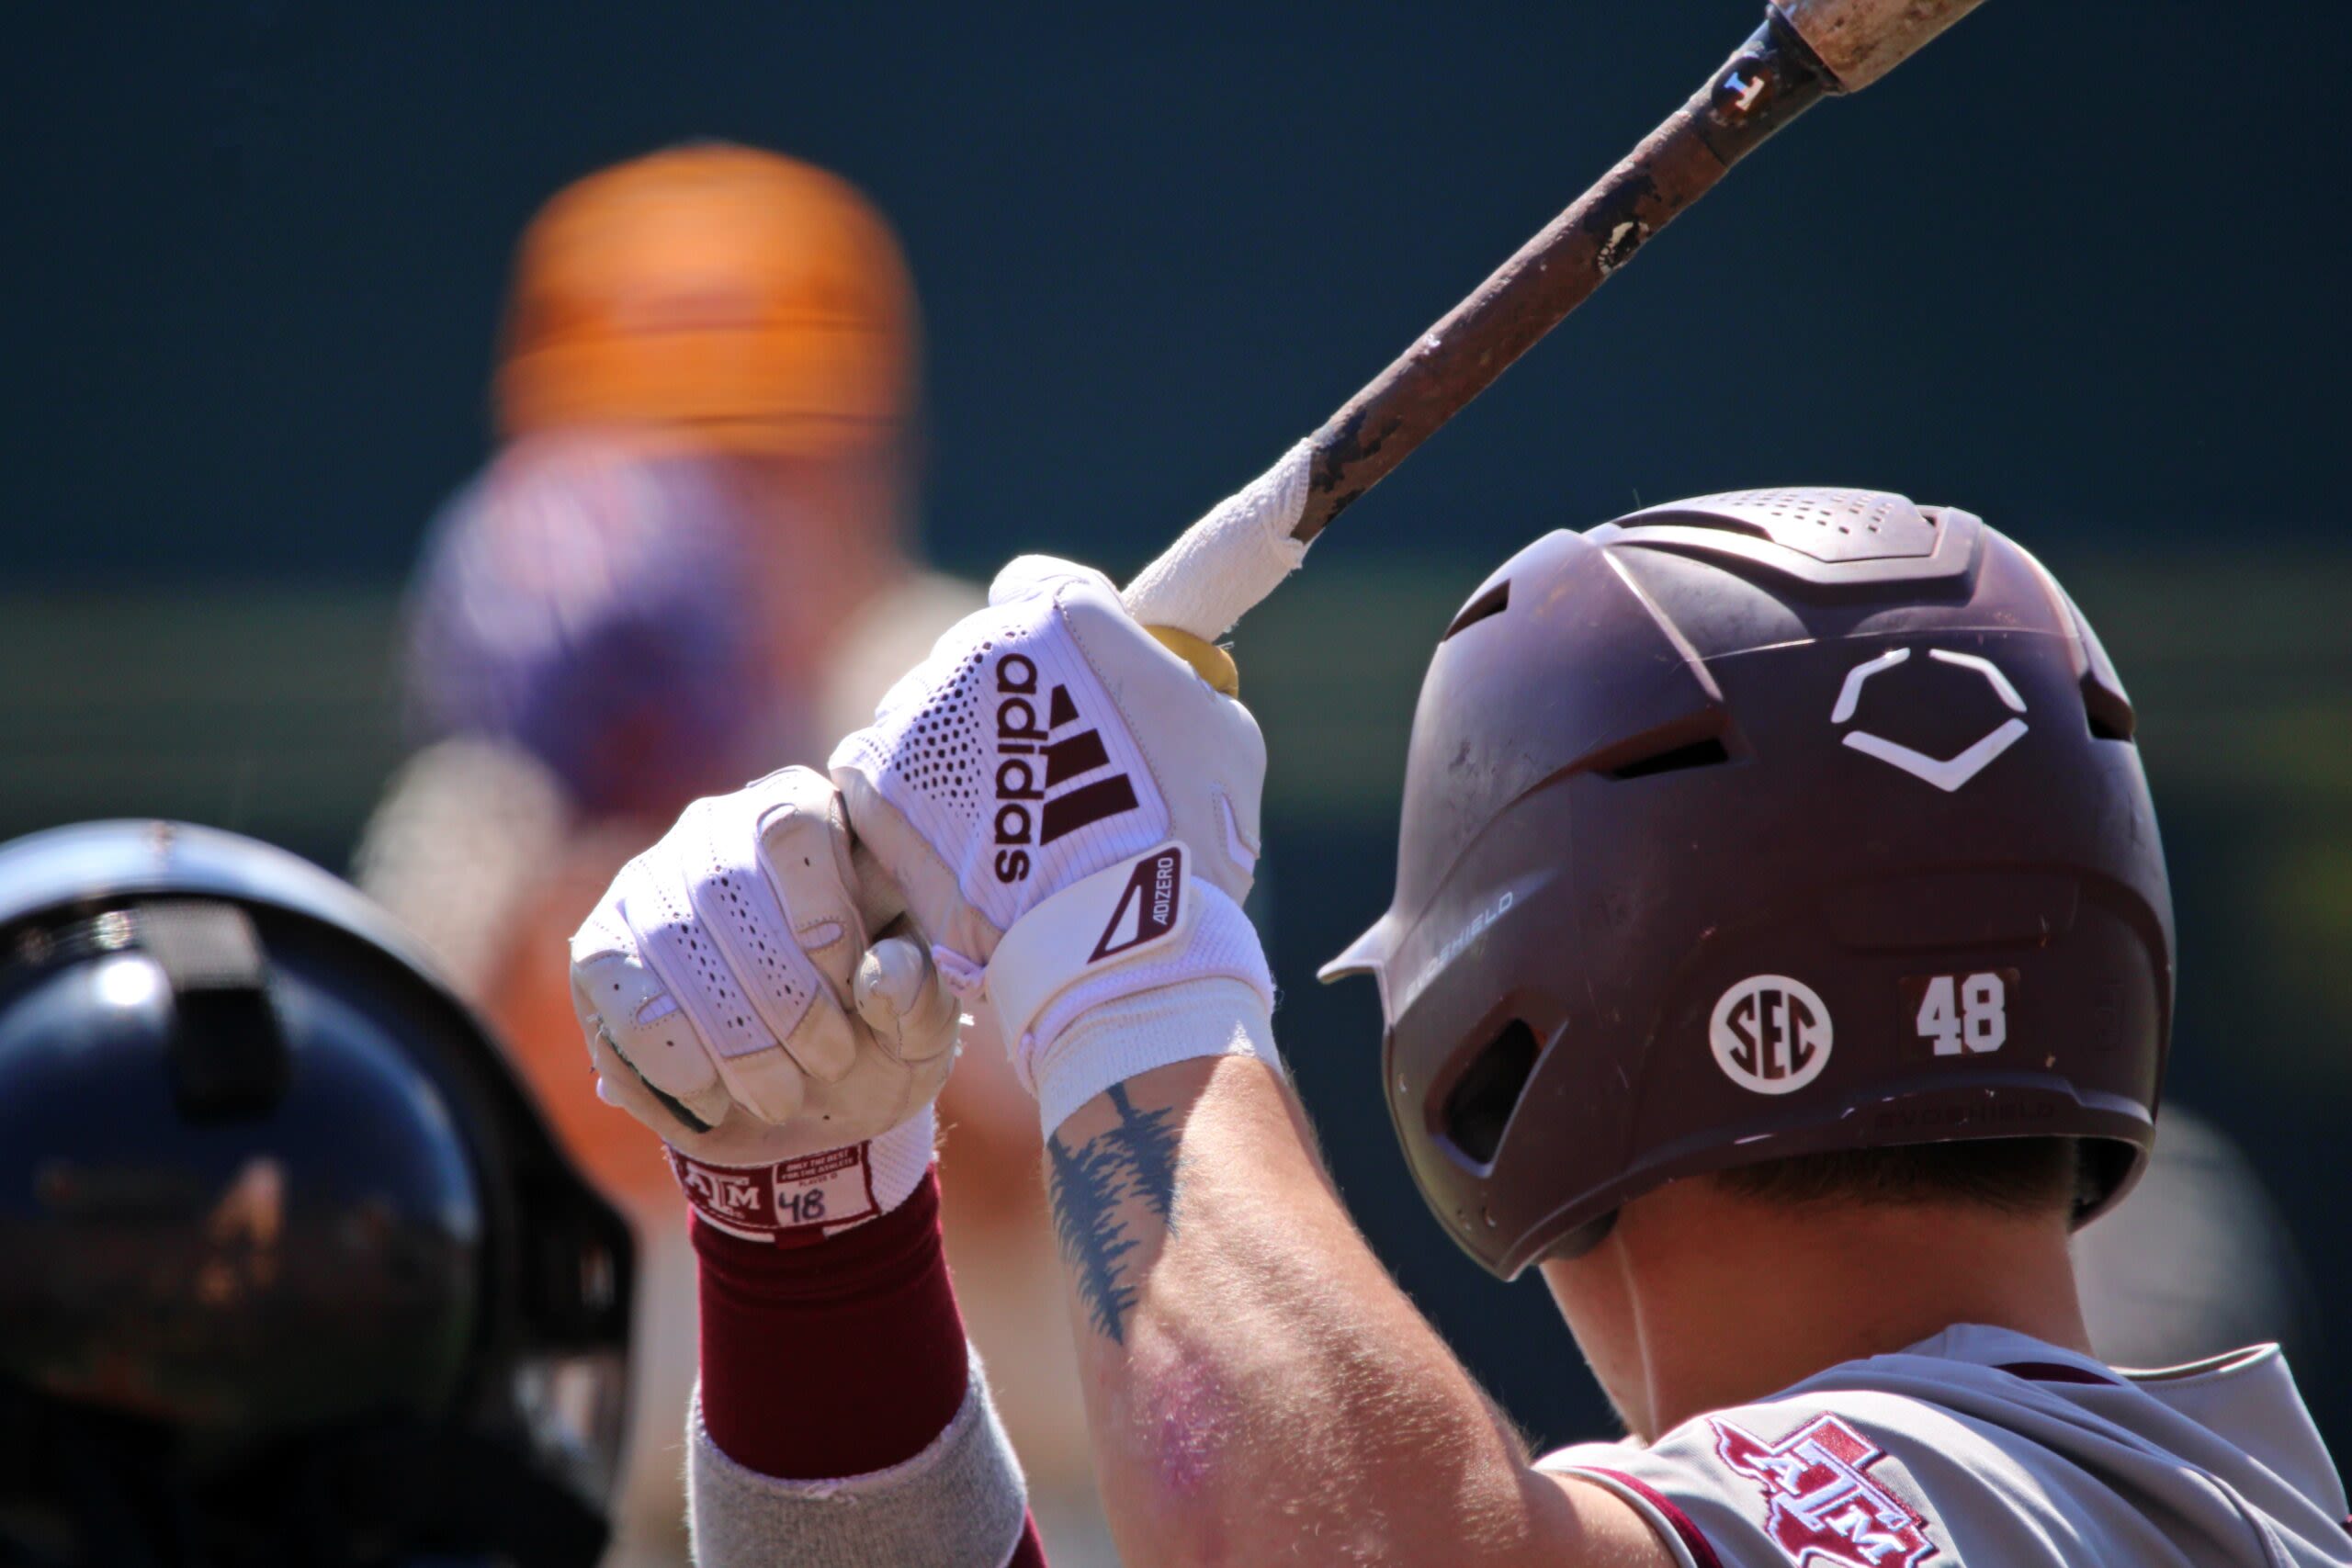 How to watch Tennessee-Texas A&M baseball game